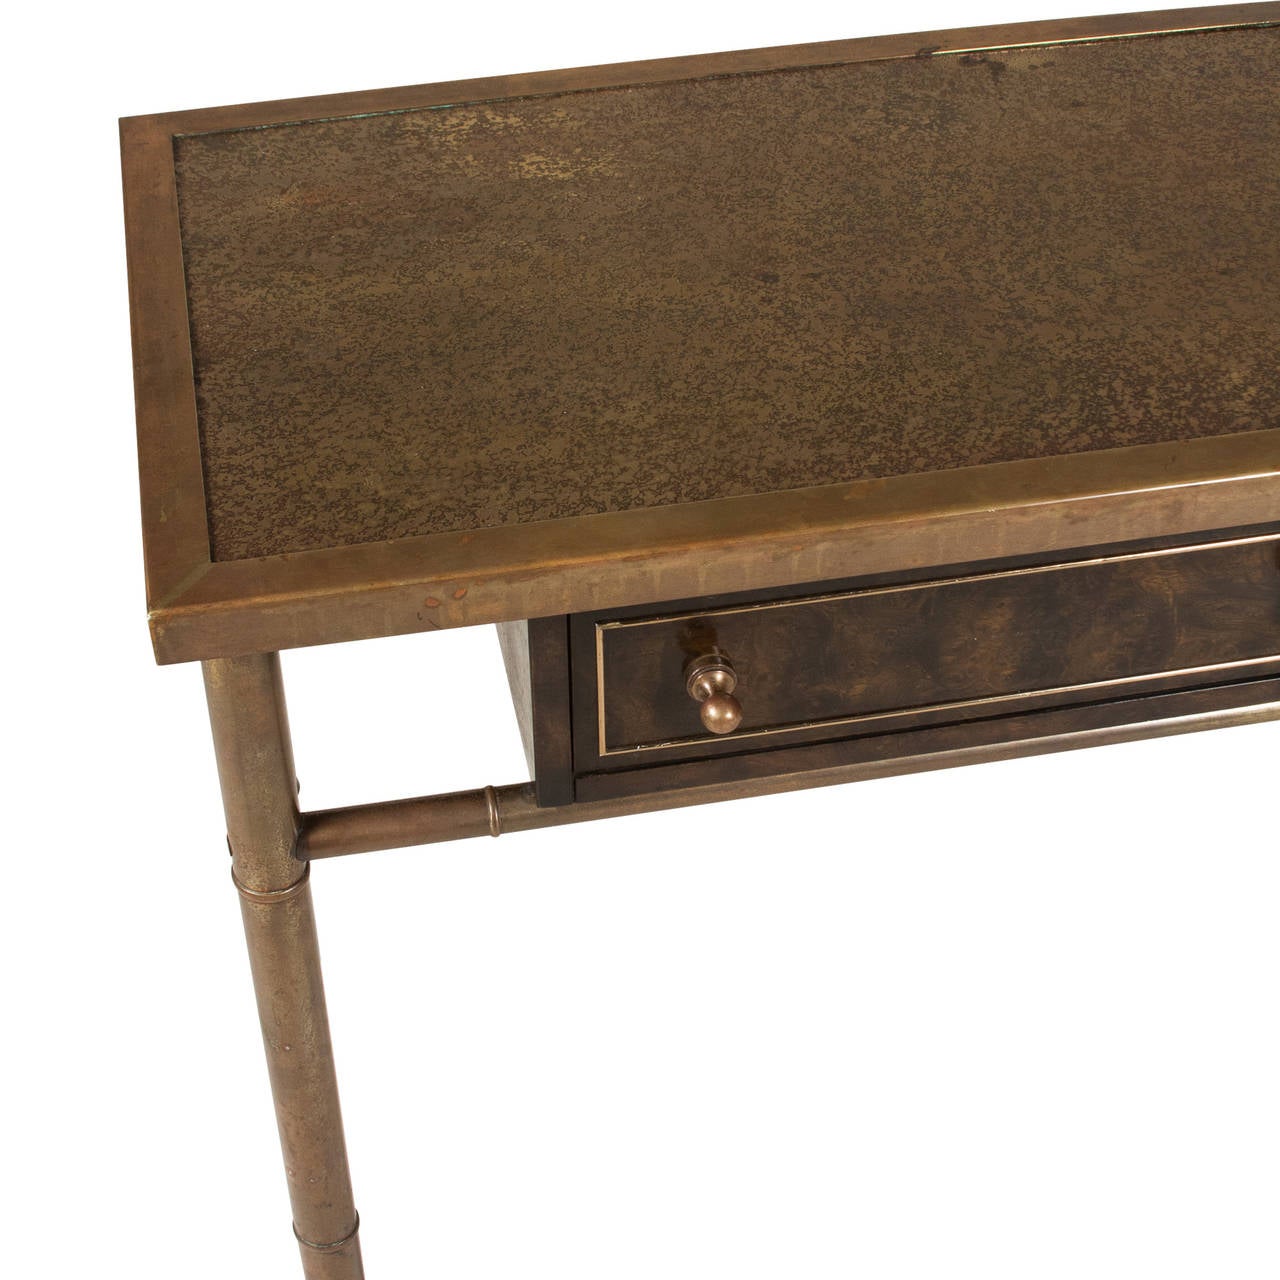 Late 20th Century Patinated Bronze Console Table by Mastercraft